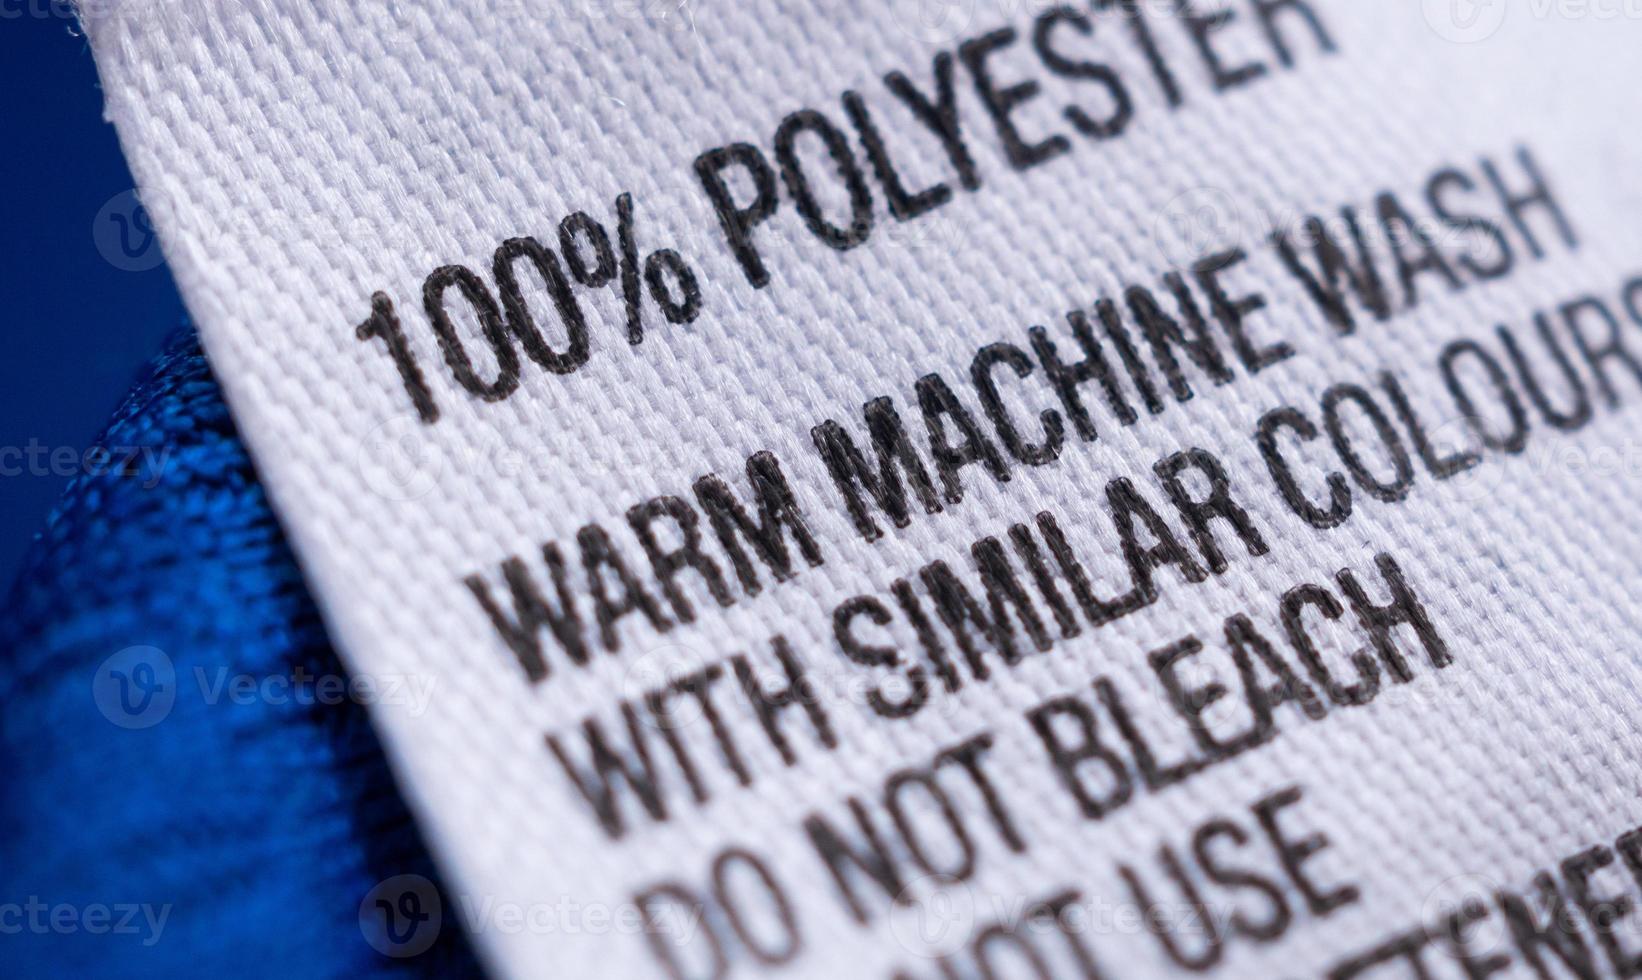 Polyester clothing label with laundry care instructions tag on blue shirt jersey photo